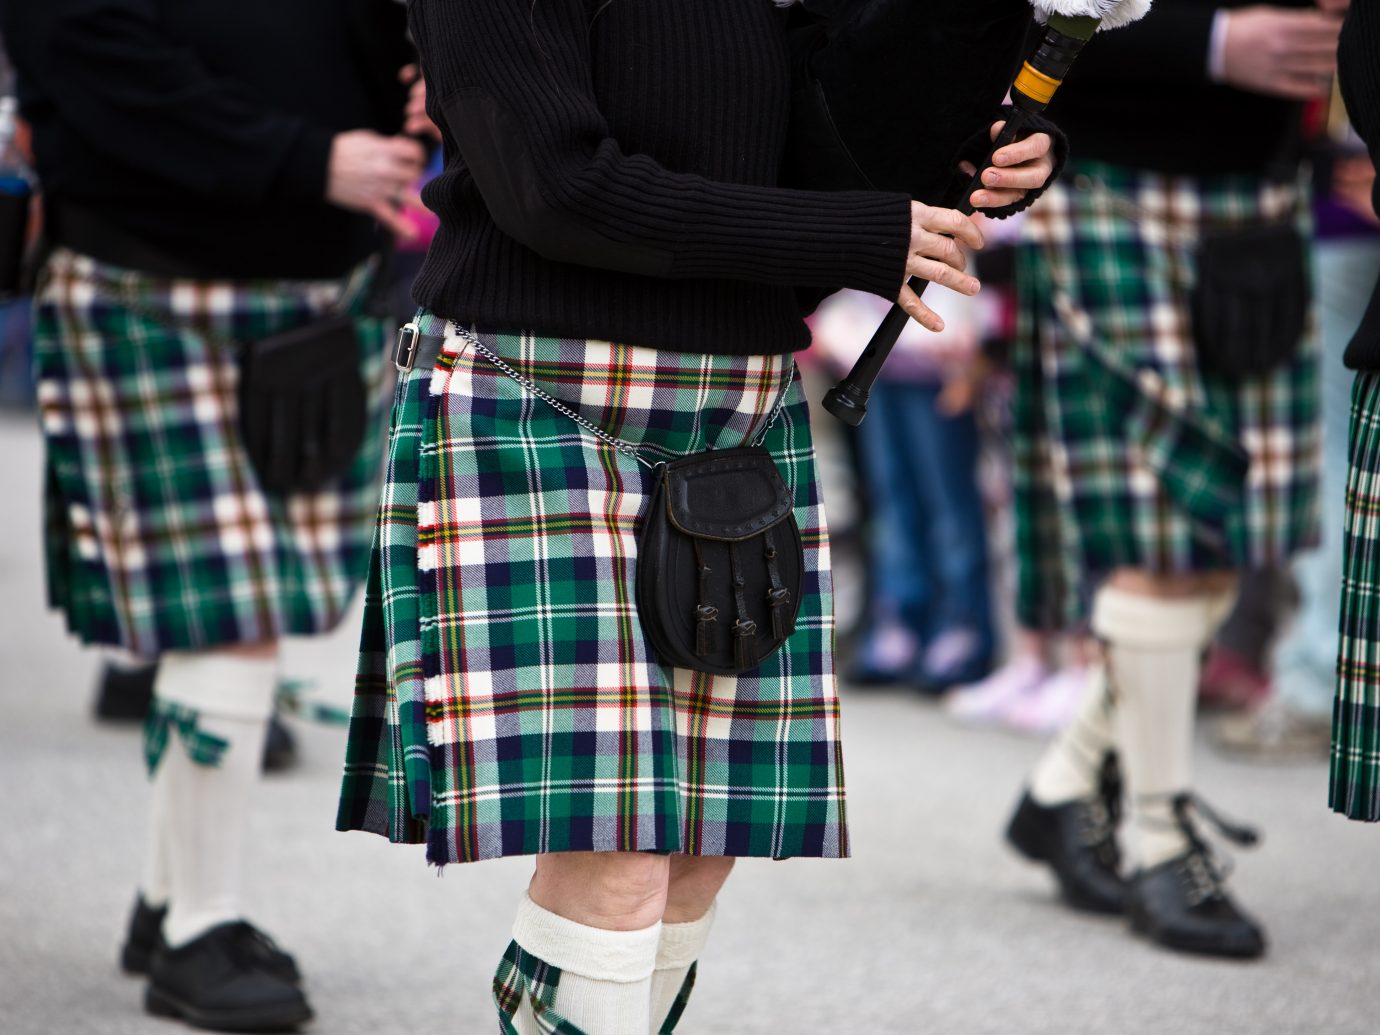 Bagpipers marching in a parade